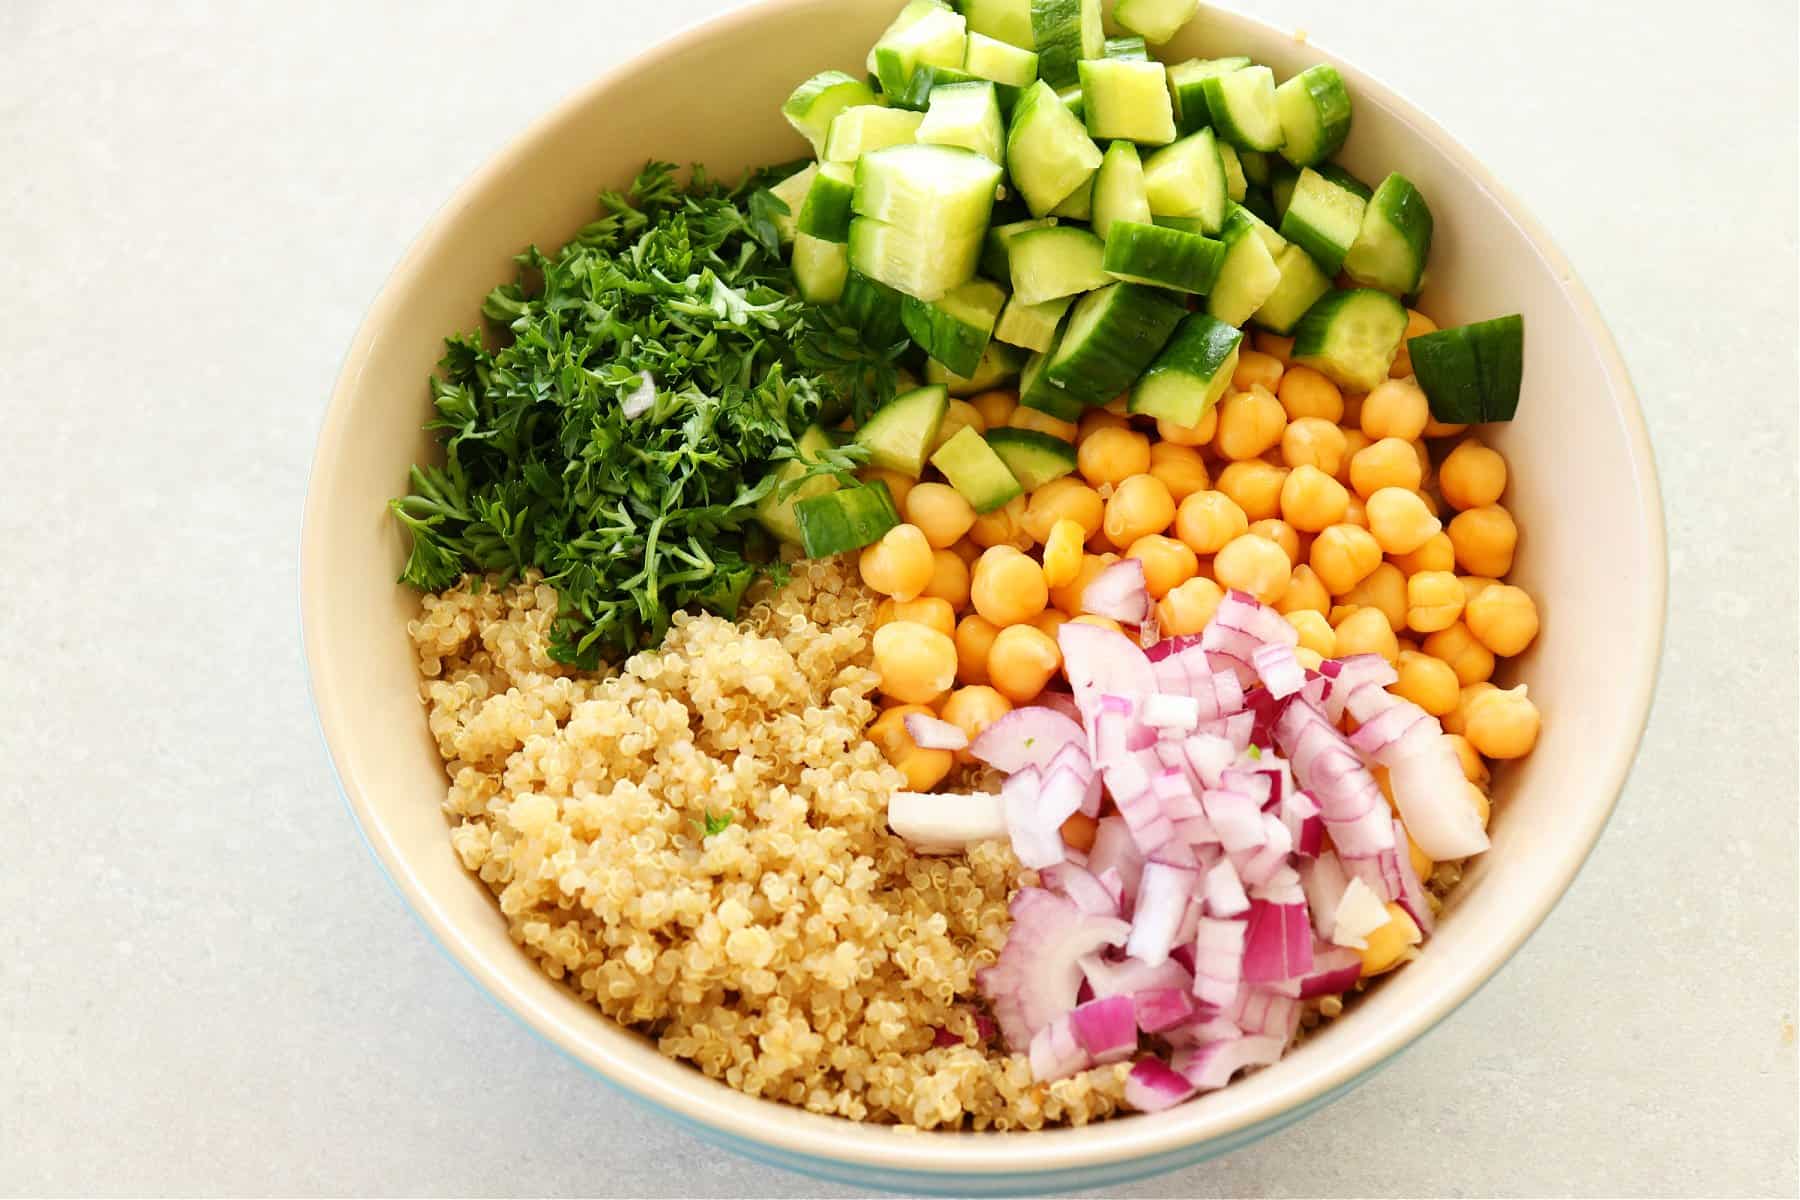 Ingredients for chickpea quinoa salad in a bowl.